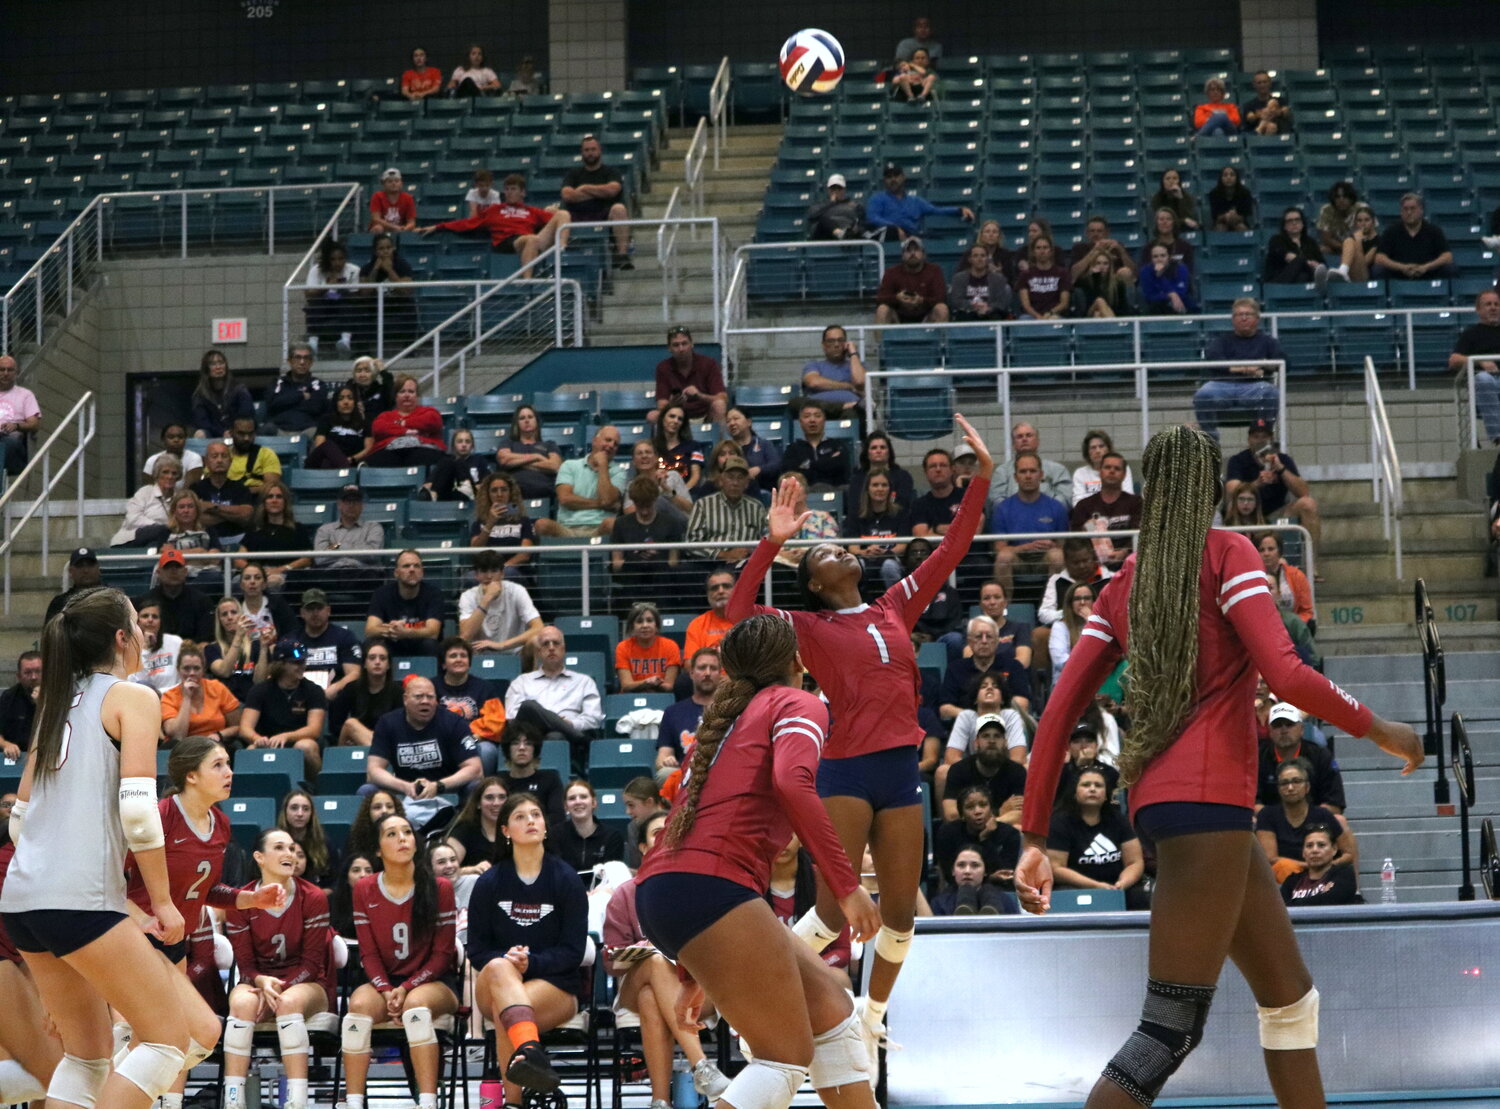 Tompkins’ Christian Cowart spikes the ball during Tuesday’s match between Seven Lakes and Tompkins at the Merrell Center.